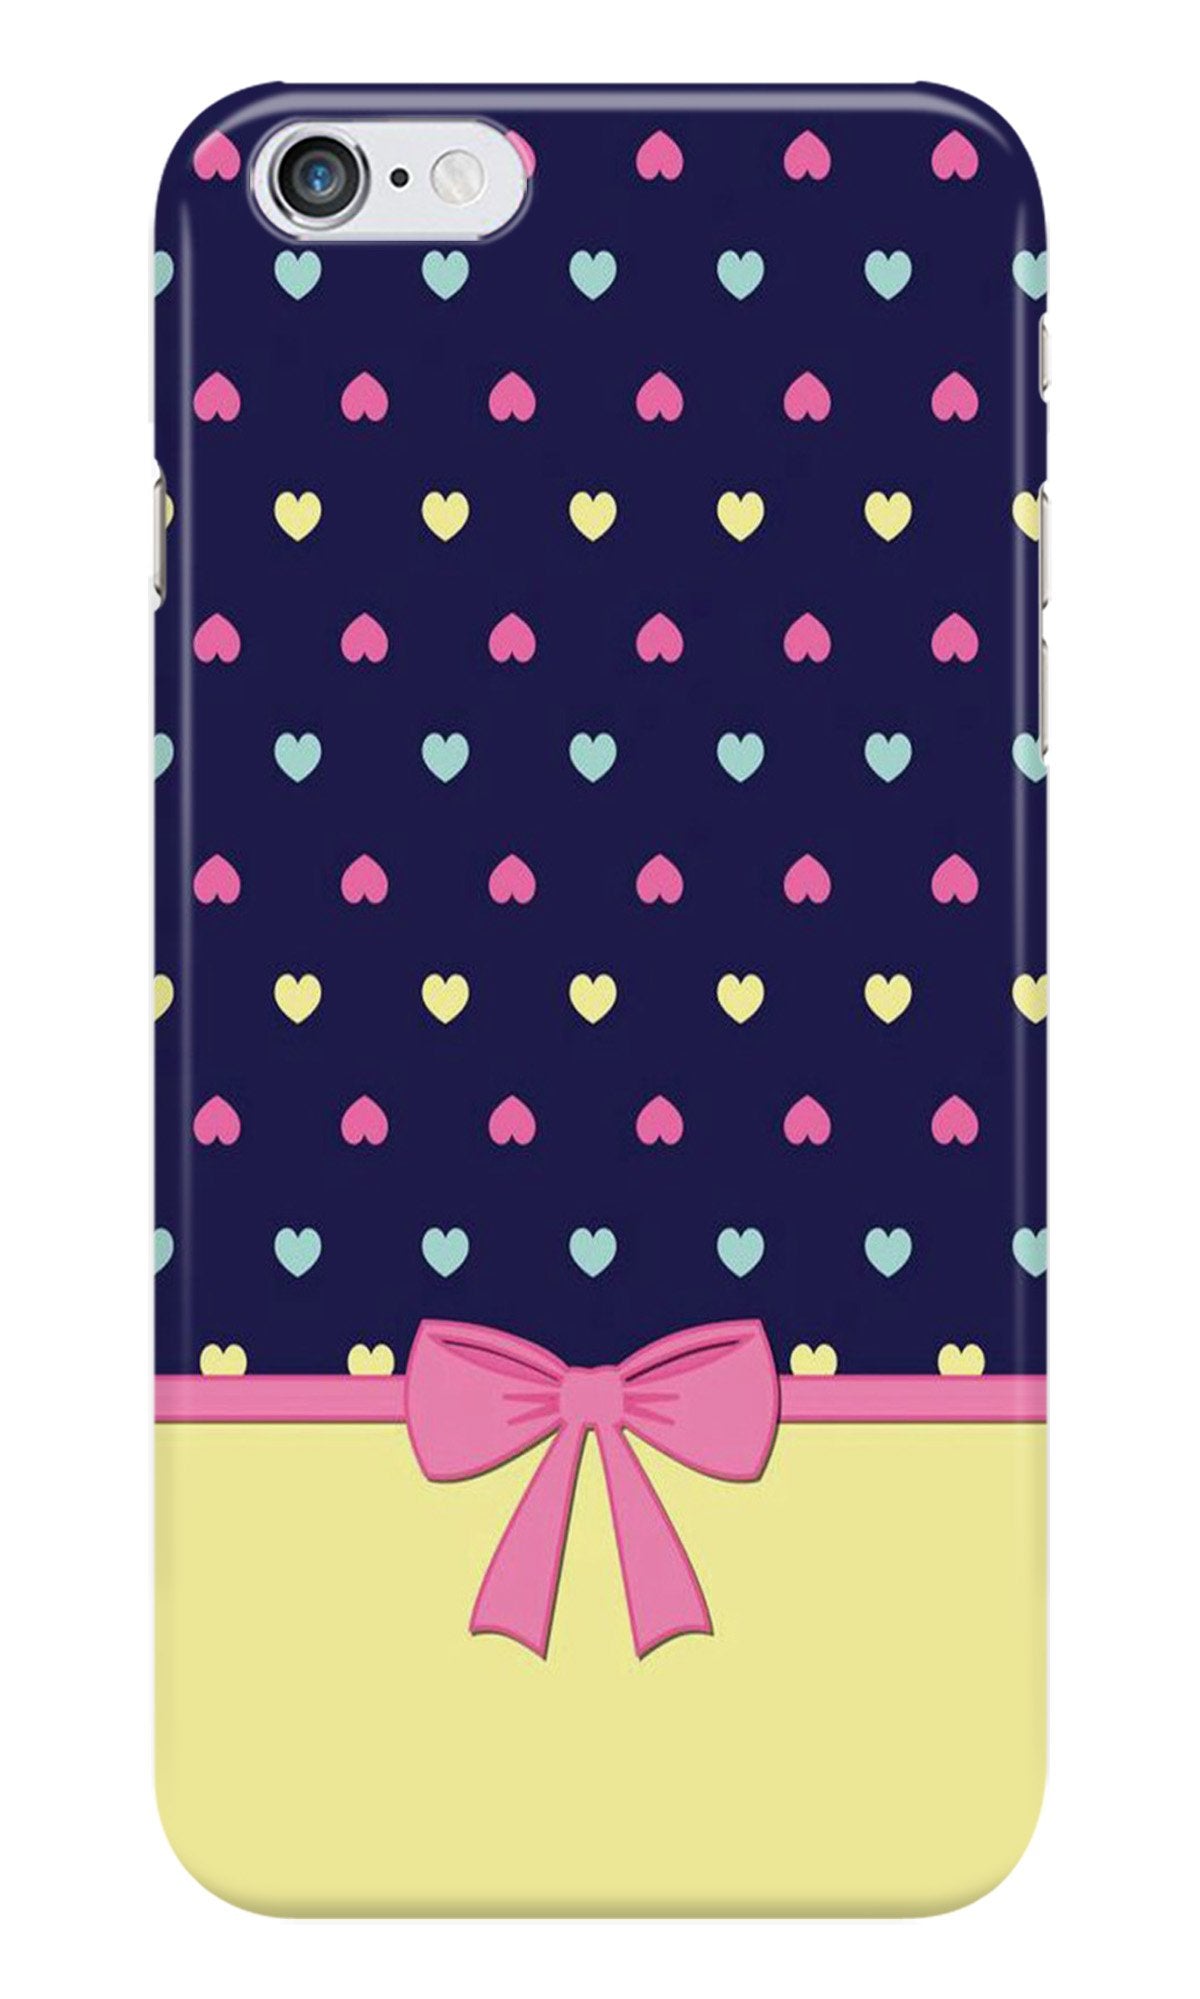 Gift Wrap5 Case for iPhone 6 Plus/ 6s Plus